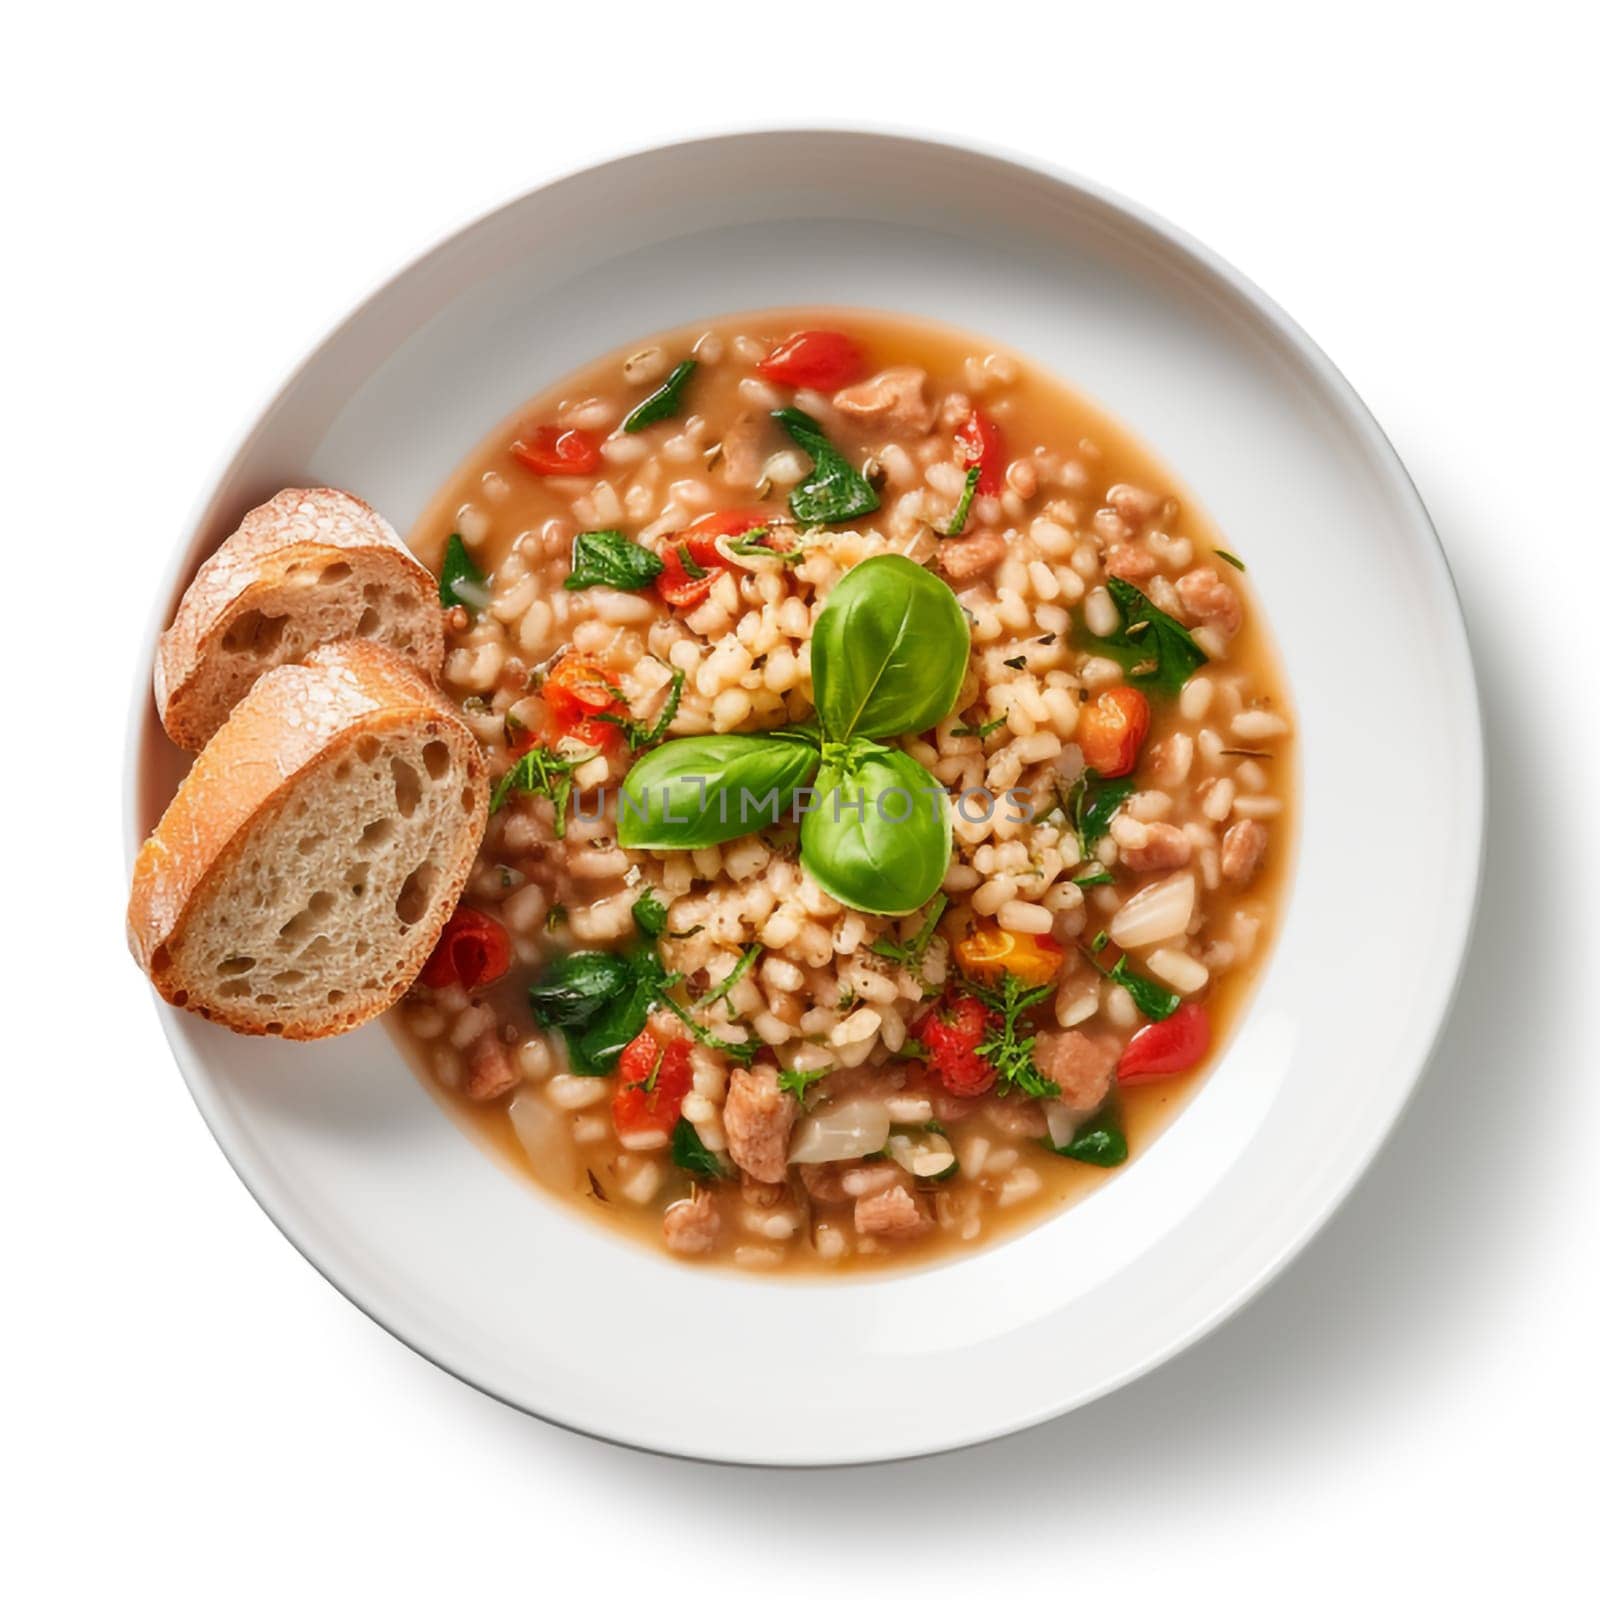 A warm embrace to the Italian culinary tradition with the rustic farro soup by Ciorba